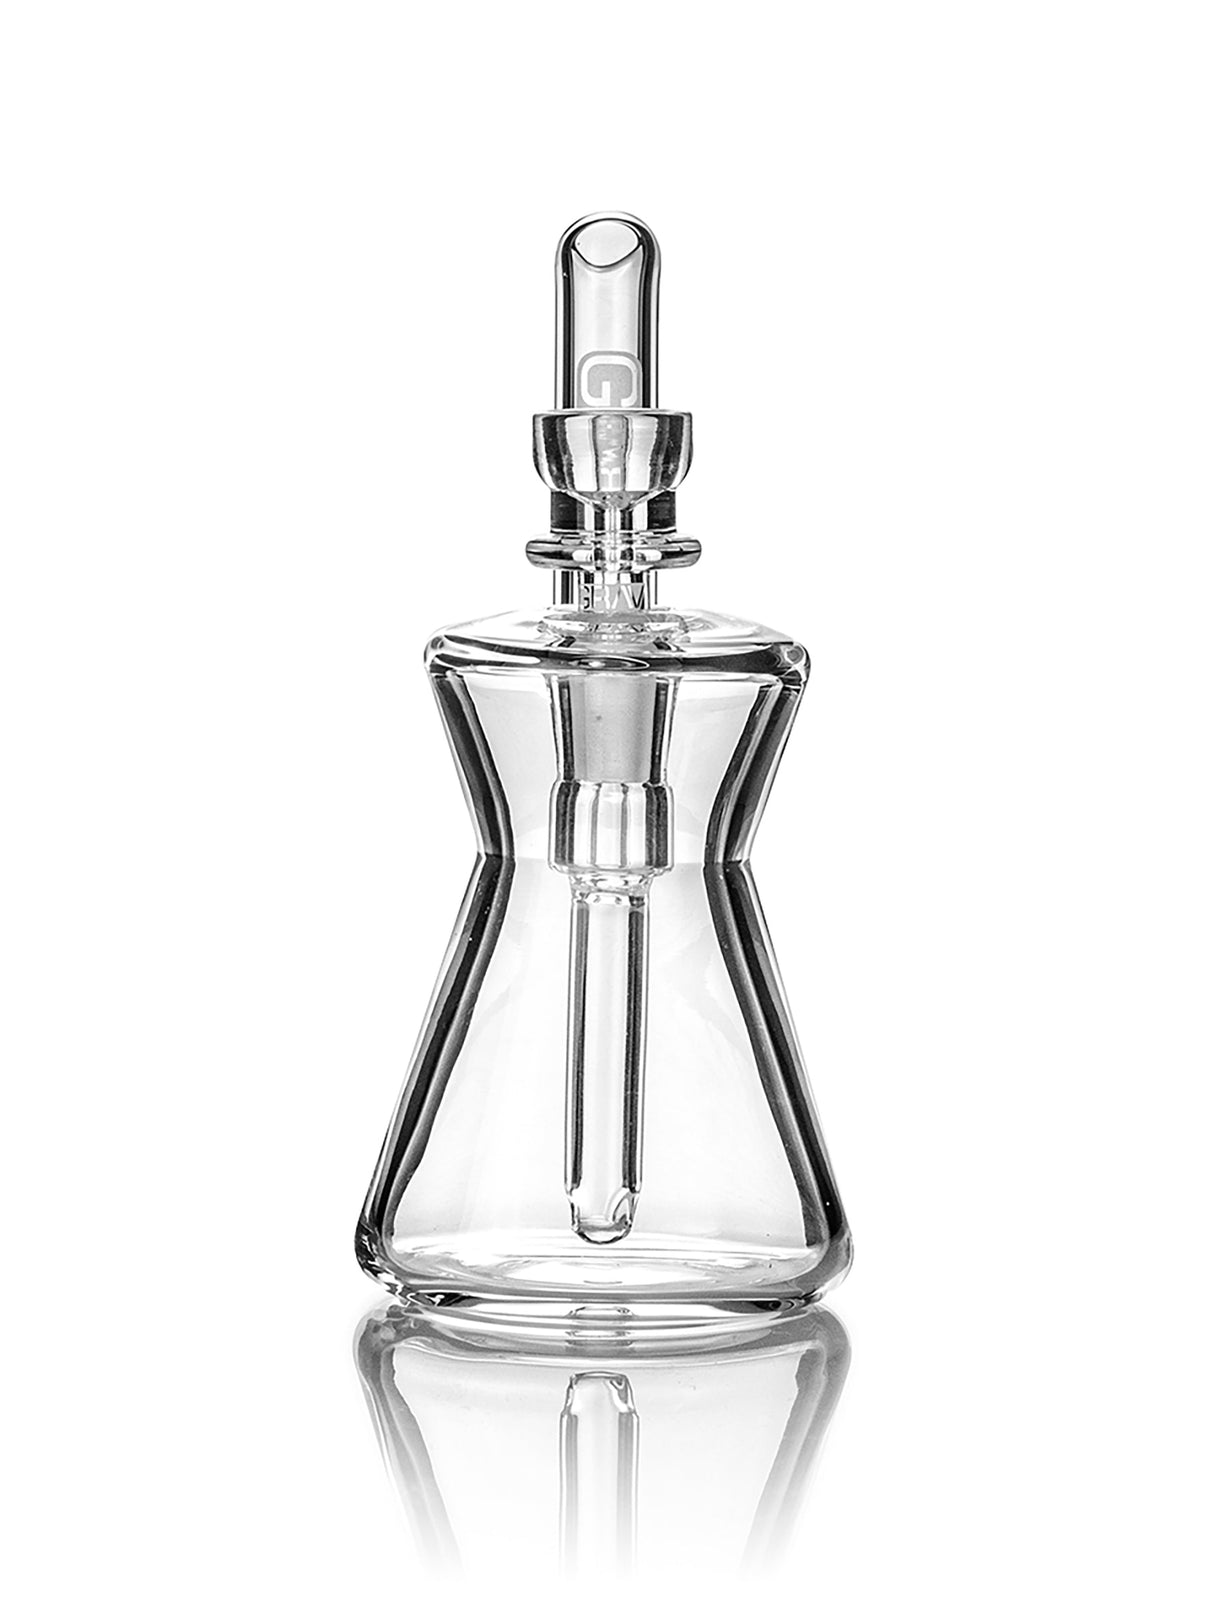 GRAV Hourglass Pocket Bubbler in Clear Borosilicate Glass, Front View on Reflective Surface